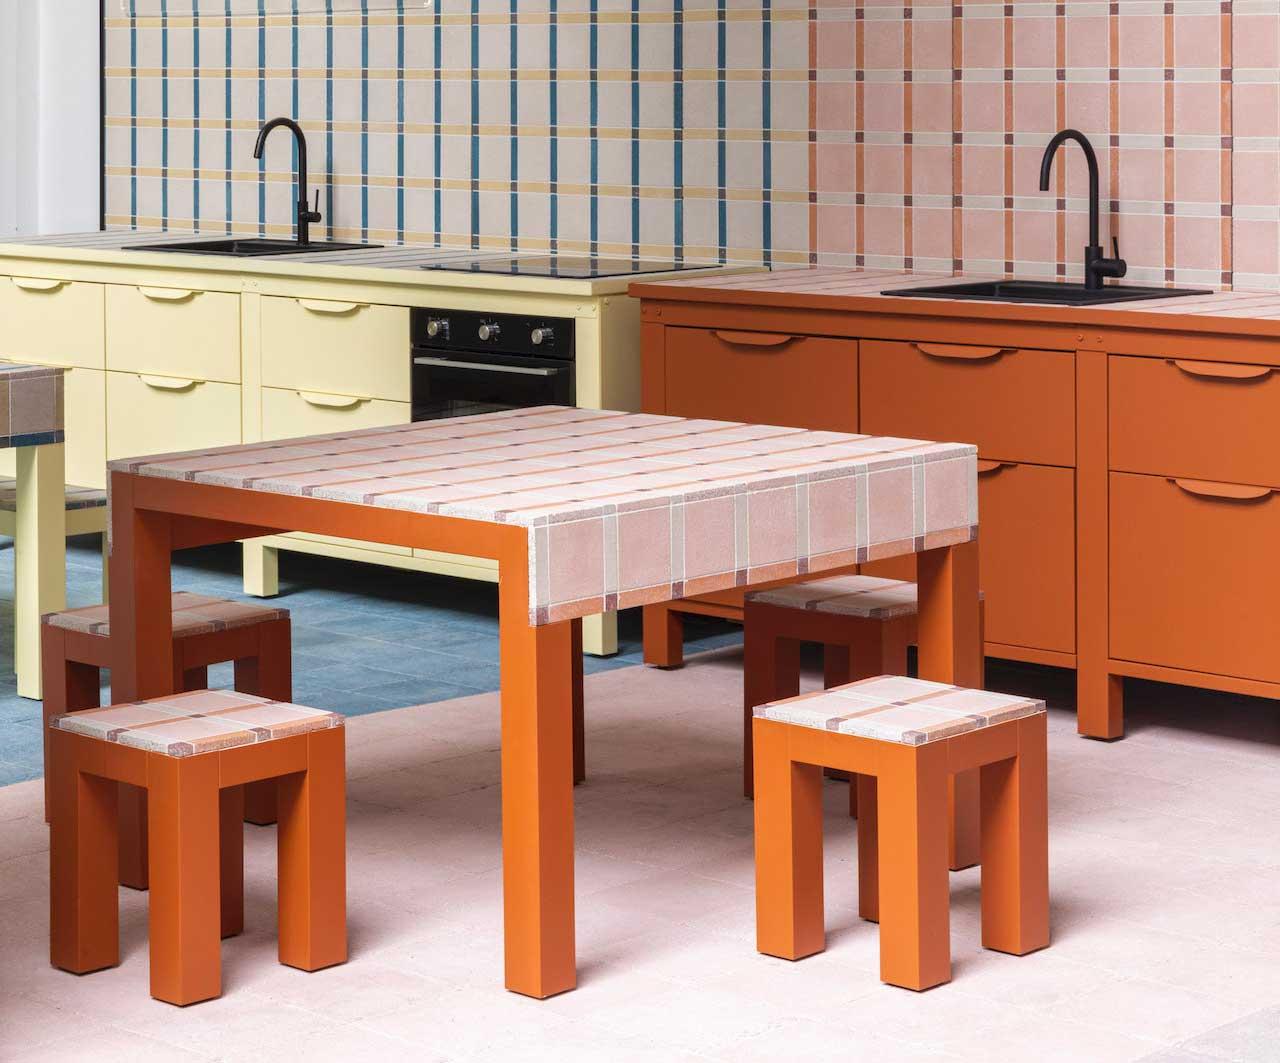 Theres No Need For Tablecloths Or Backsplashes With Zdora Make House